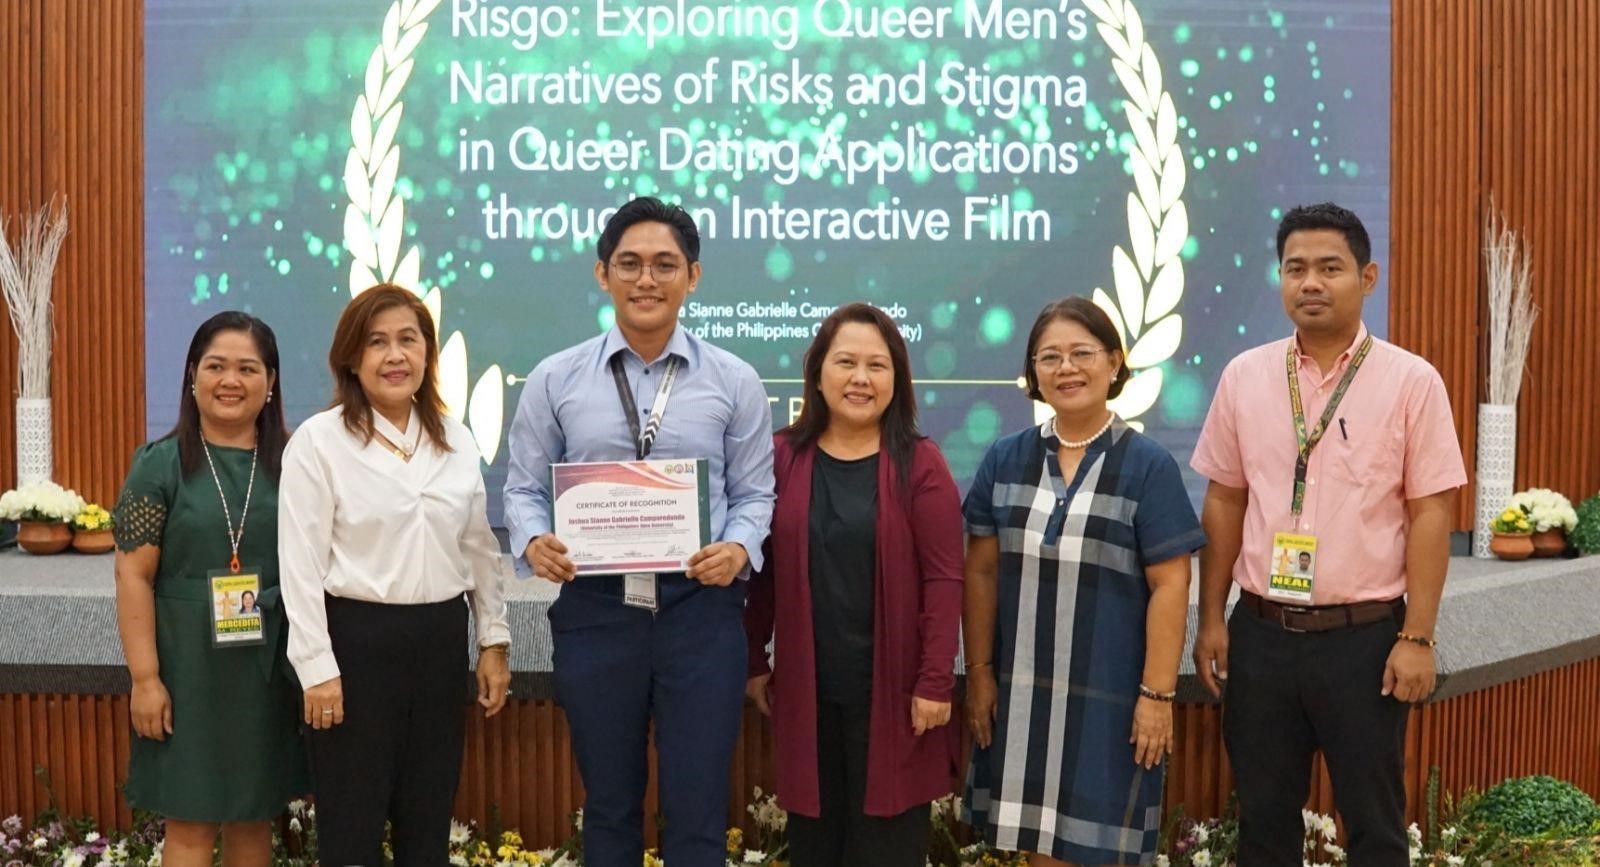 From L-R: Dr. Mercedita M. Reyes (Chair, GAD Research Congress Steering Committee), Dr. Ravelina R. Velasco (CLSU Vice President for Academic Affairs), Mr. Joshua Sianne Gabrielle Camporedondo (UPOU-BAMS student), Dr. Emely Amoloza (Camporedondo’s Adviser and UPOU-BAMS Program Chair), Prof. Janet O. Saturno (Director, CLSU Gender and Development Office/GAD Core Group Coordinator), Mr. Neal Del A. Rosario (CLAARRDEC Director)